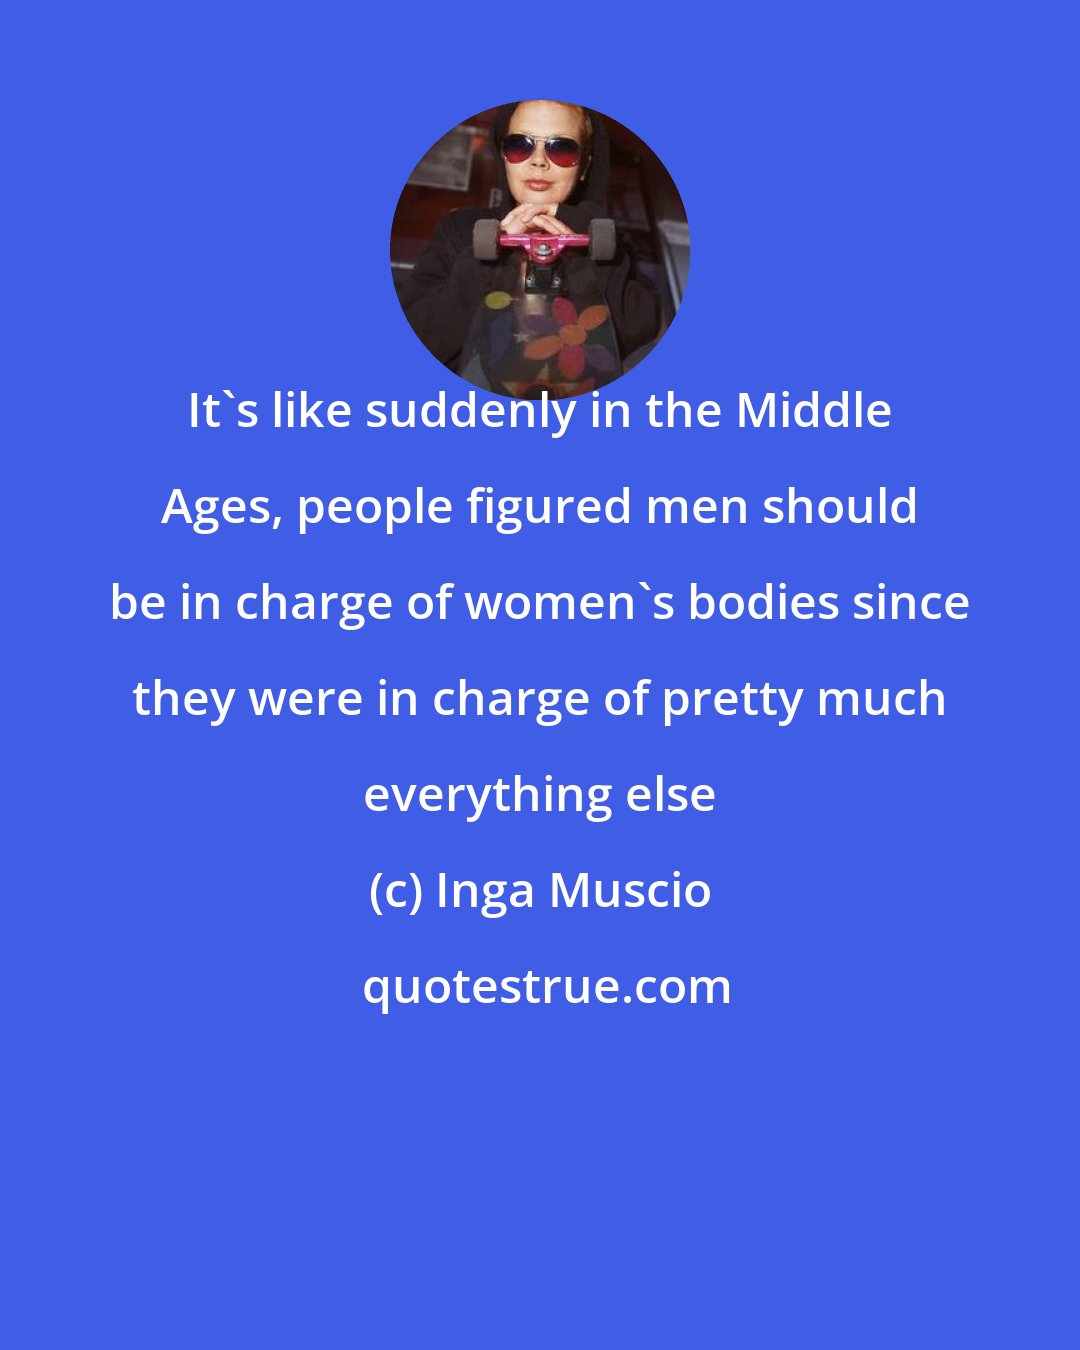 Inga Muscio: It's like suddenly in the Middle Ages, people figured men should be in charge of women's bodies since they were in charge of pretty much everything else